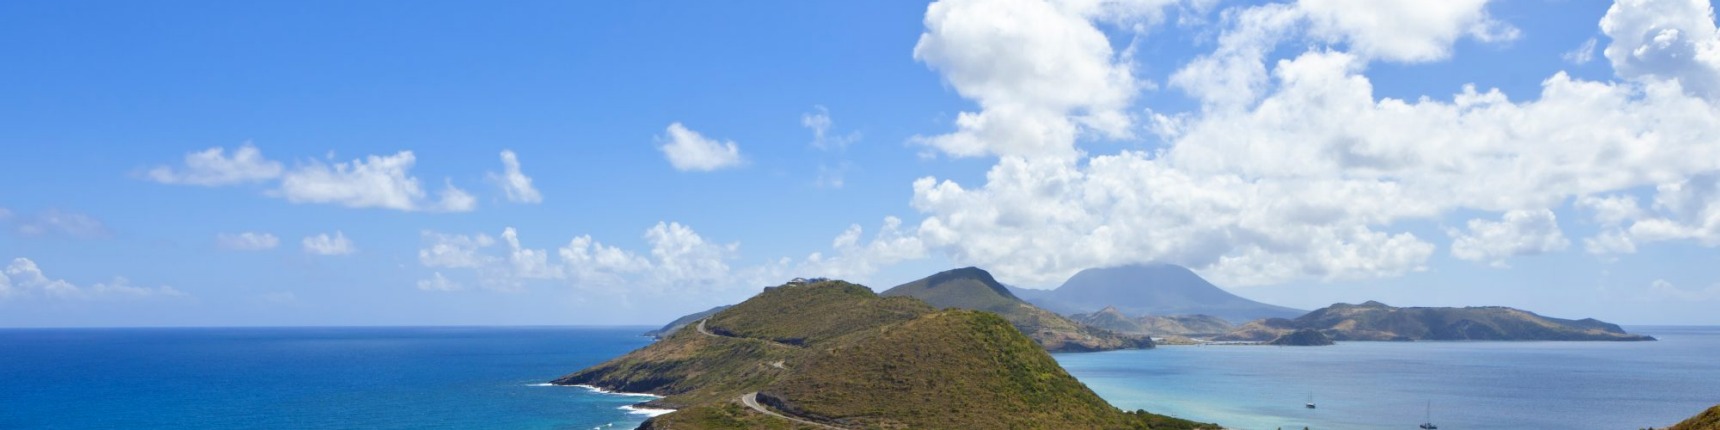 Saint Kitts and Nevis, West Indies